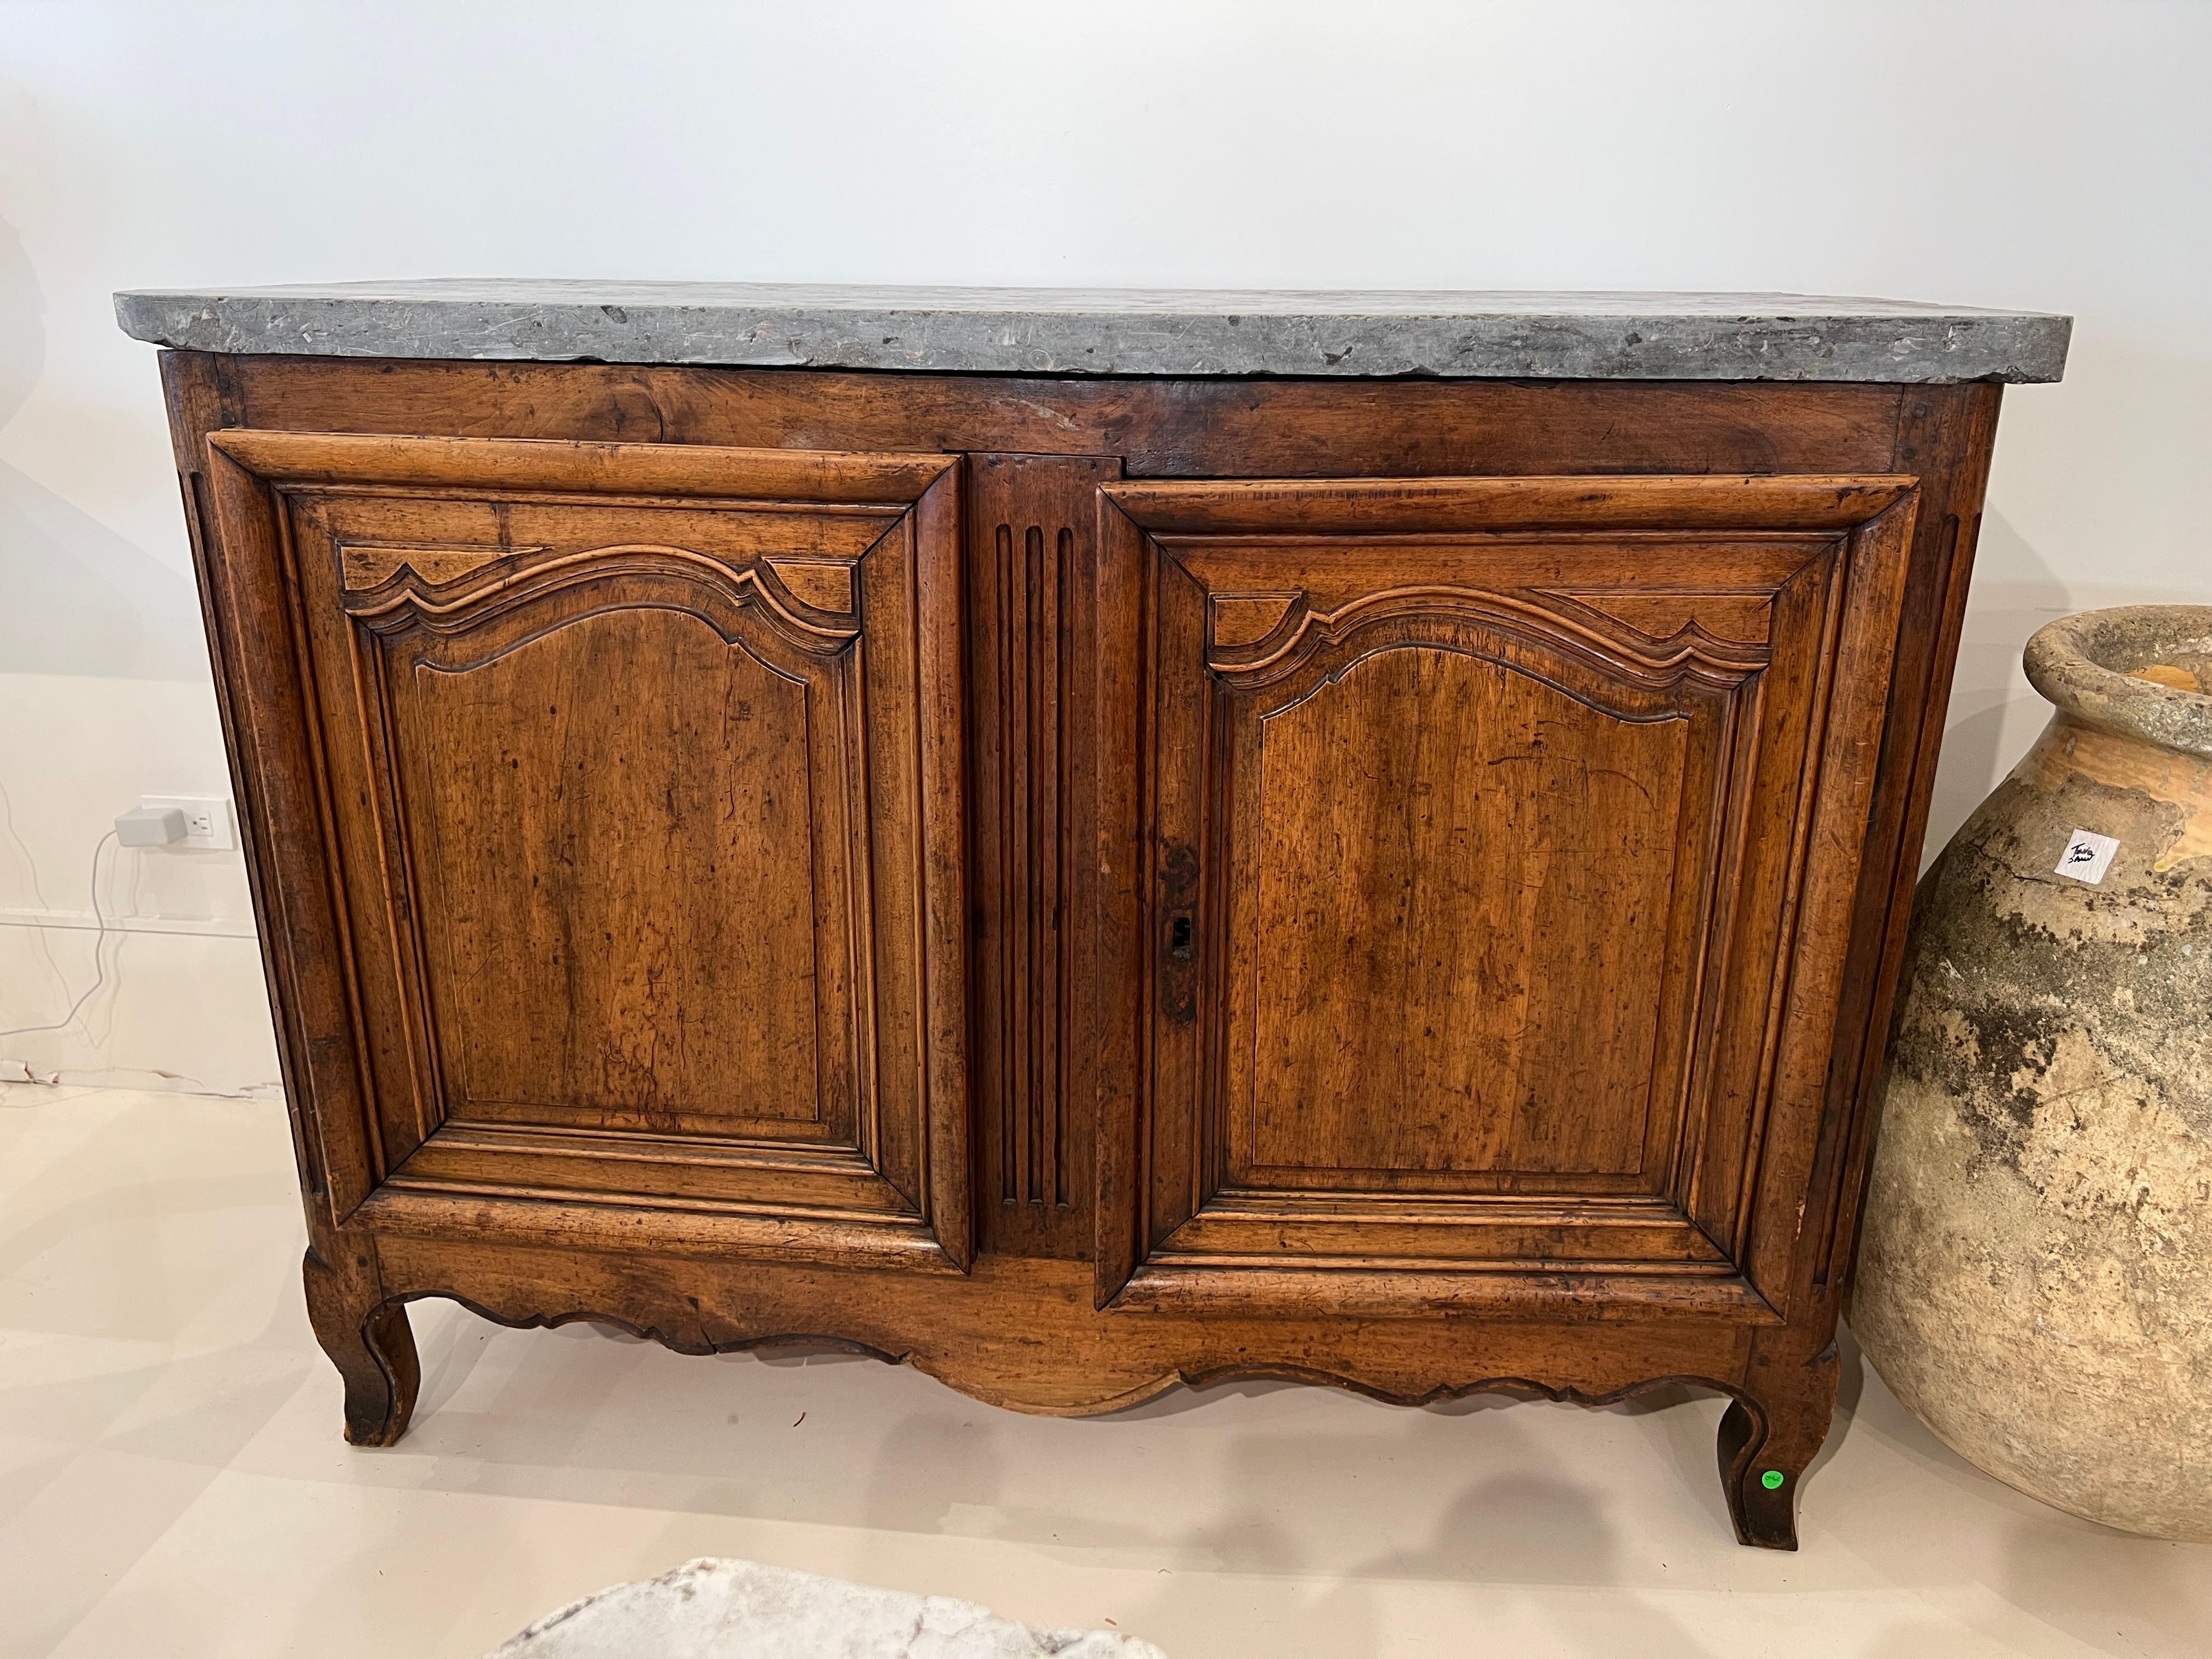 This buffet has two large doors and an imposing slate colored marble top.  The height is a bit taller than normal which gives it an important presence.  When you open the doors there is a small drawer behind each one.  A wonderful storage piece.